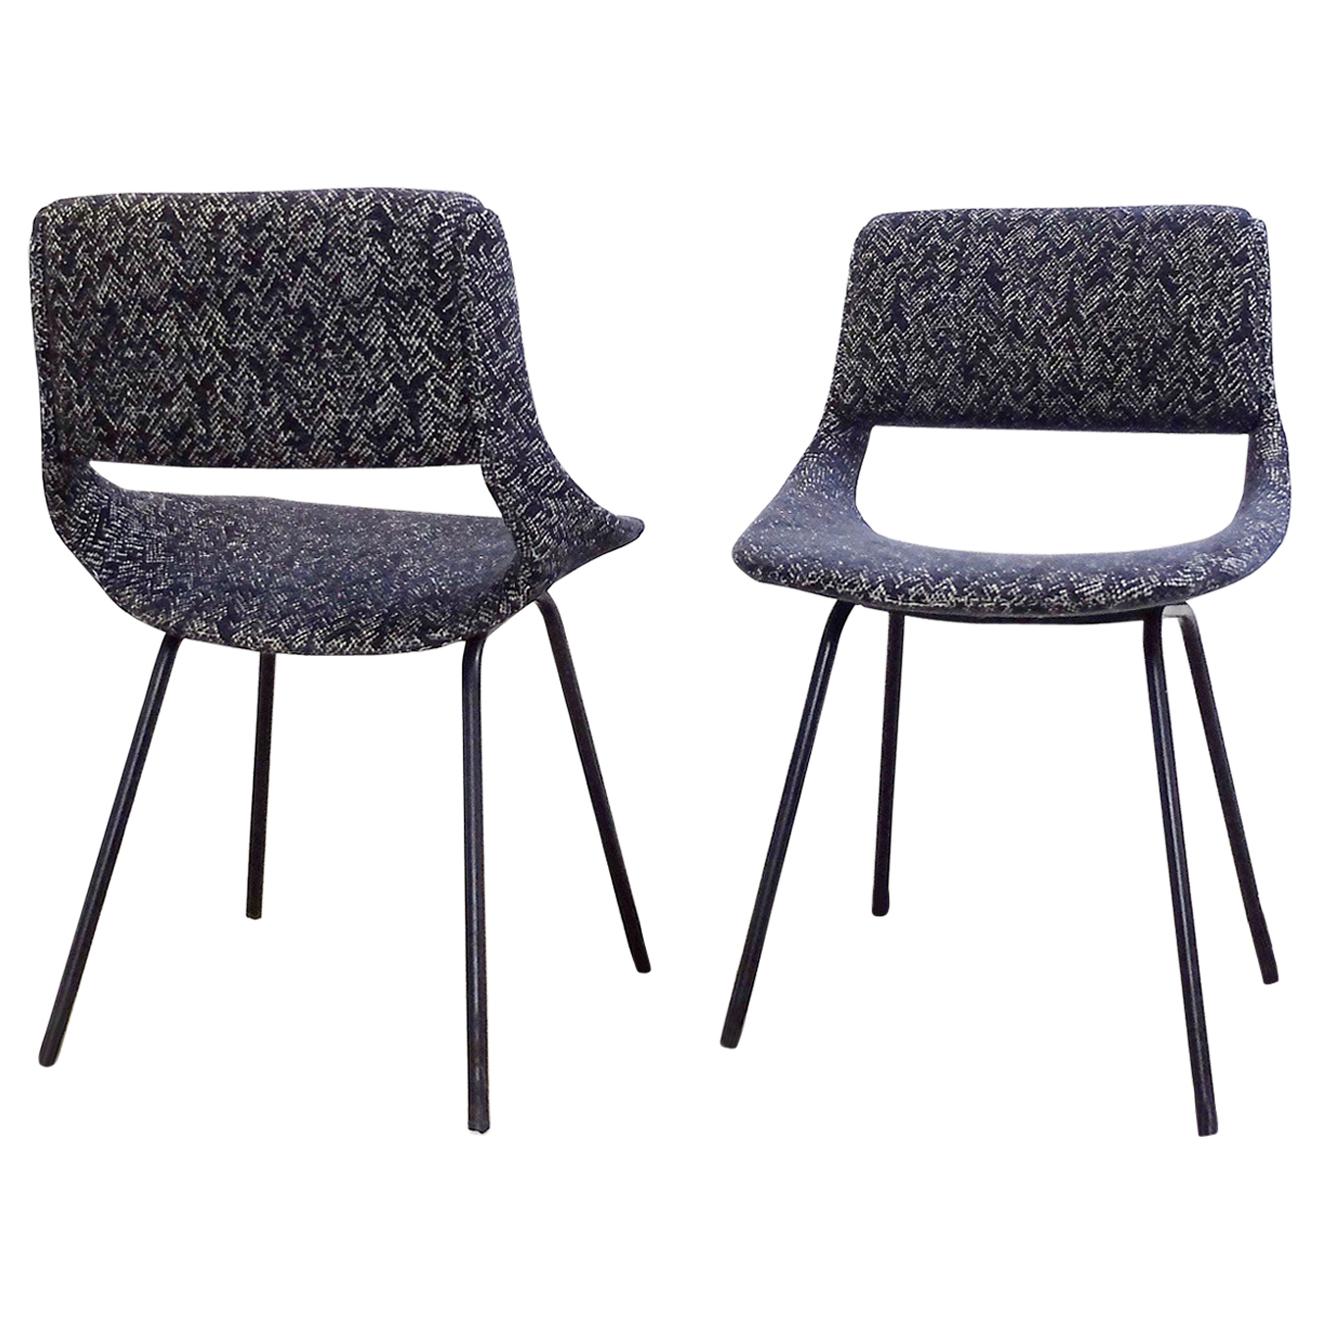 Pair of Chairs by Louis Paolozzi For Zol, New Upholstered For Sale